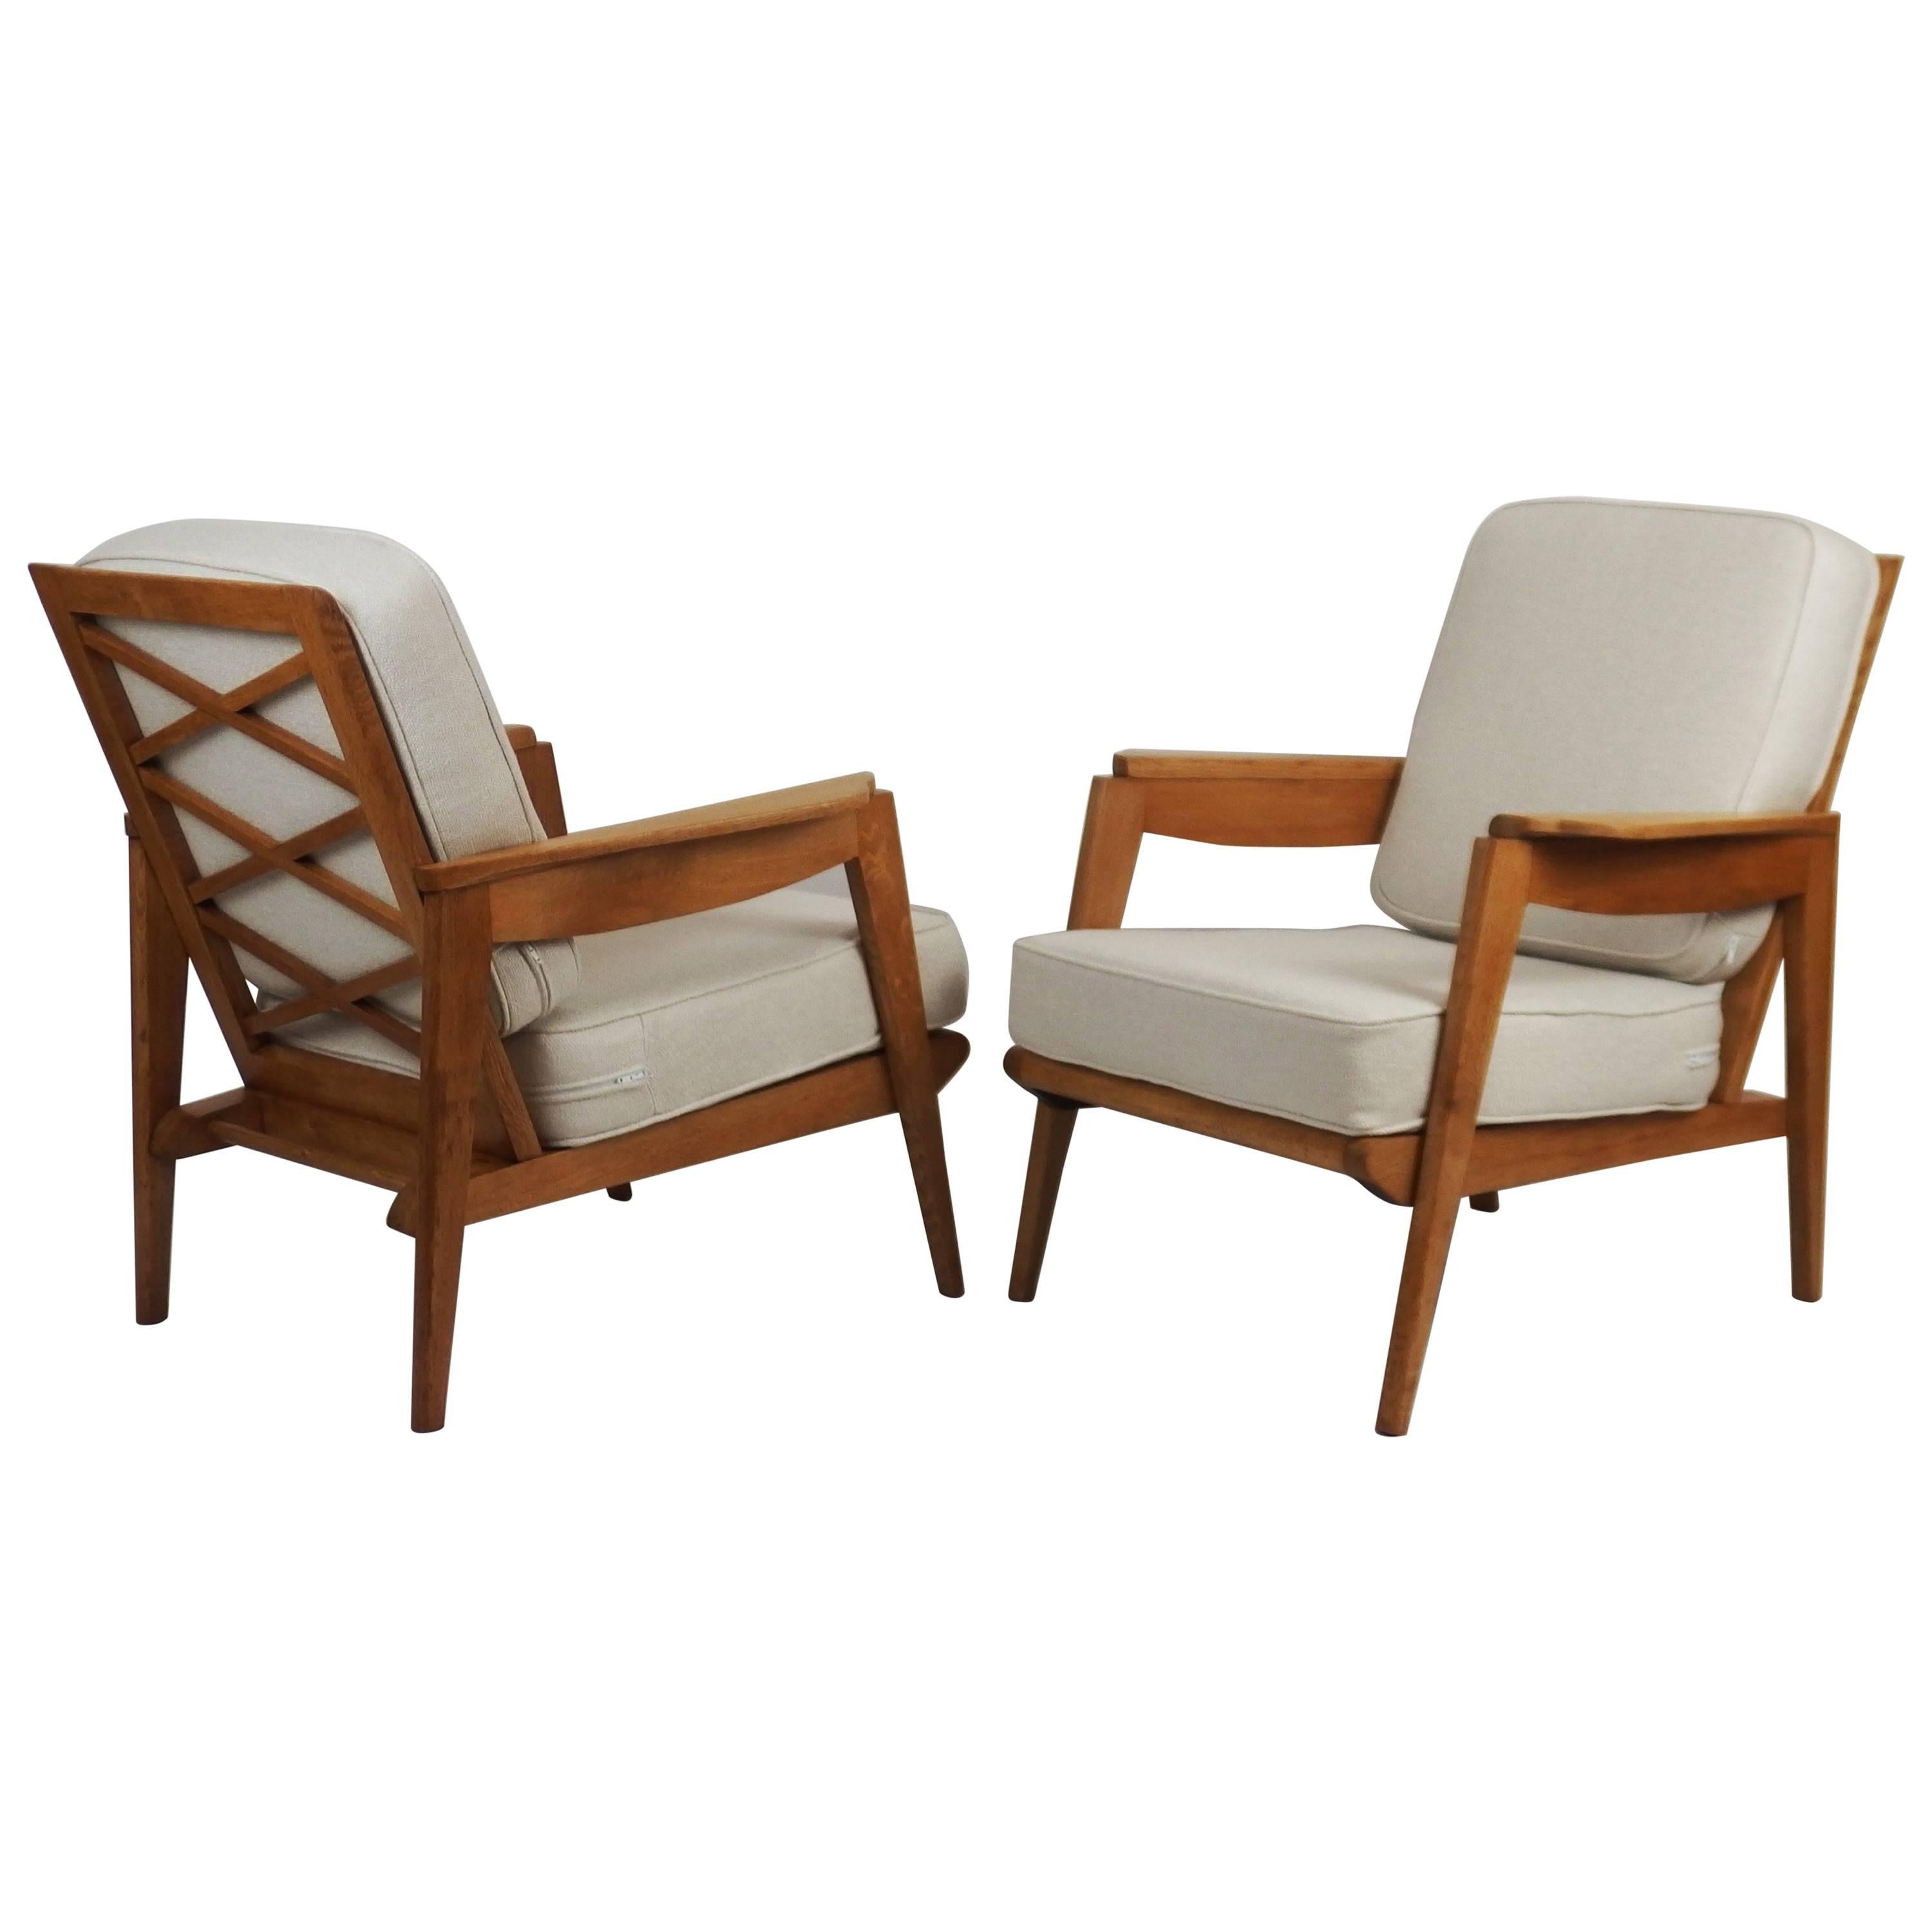 Two 1950s Armchairs by the Ateliers Saint Sabin For Sale